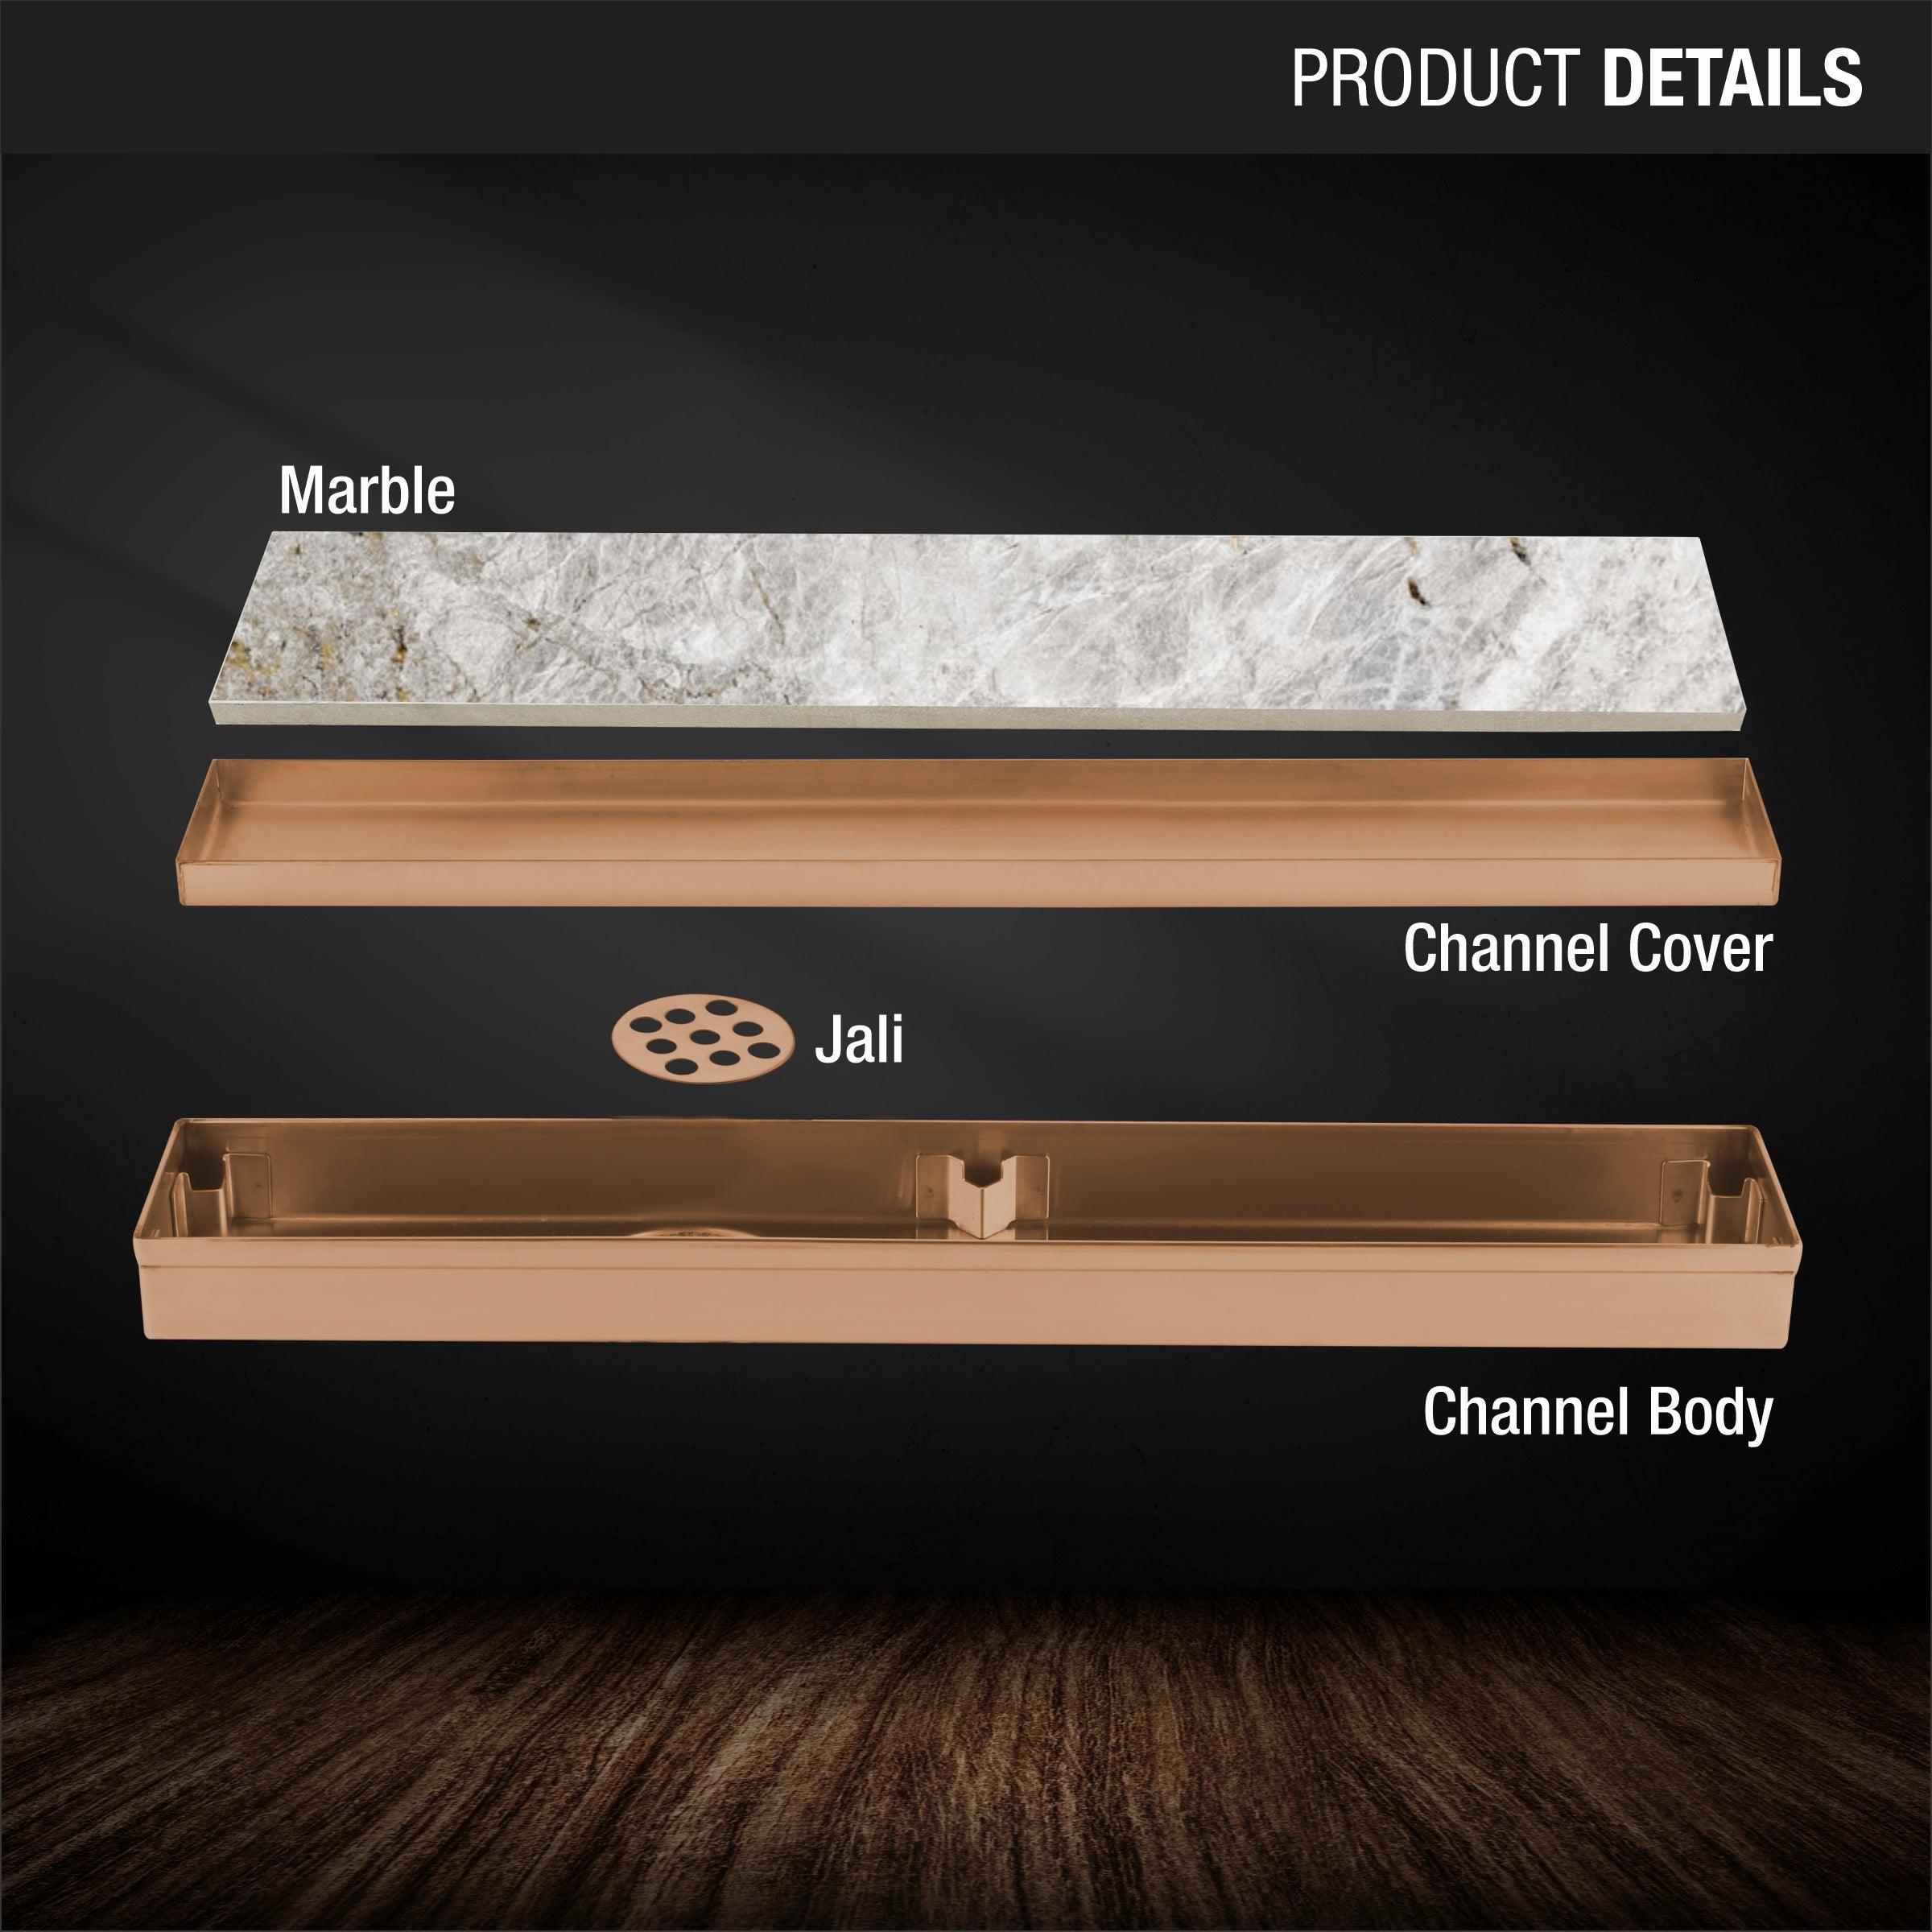 Marble Insert Shower Drain Channel - Antique Copper (24 x 2 Inches) product details